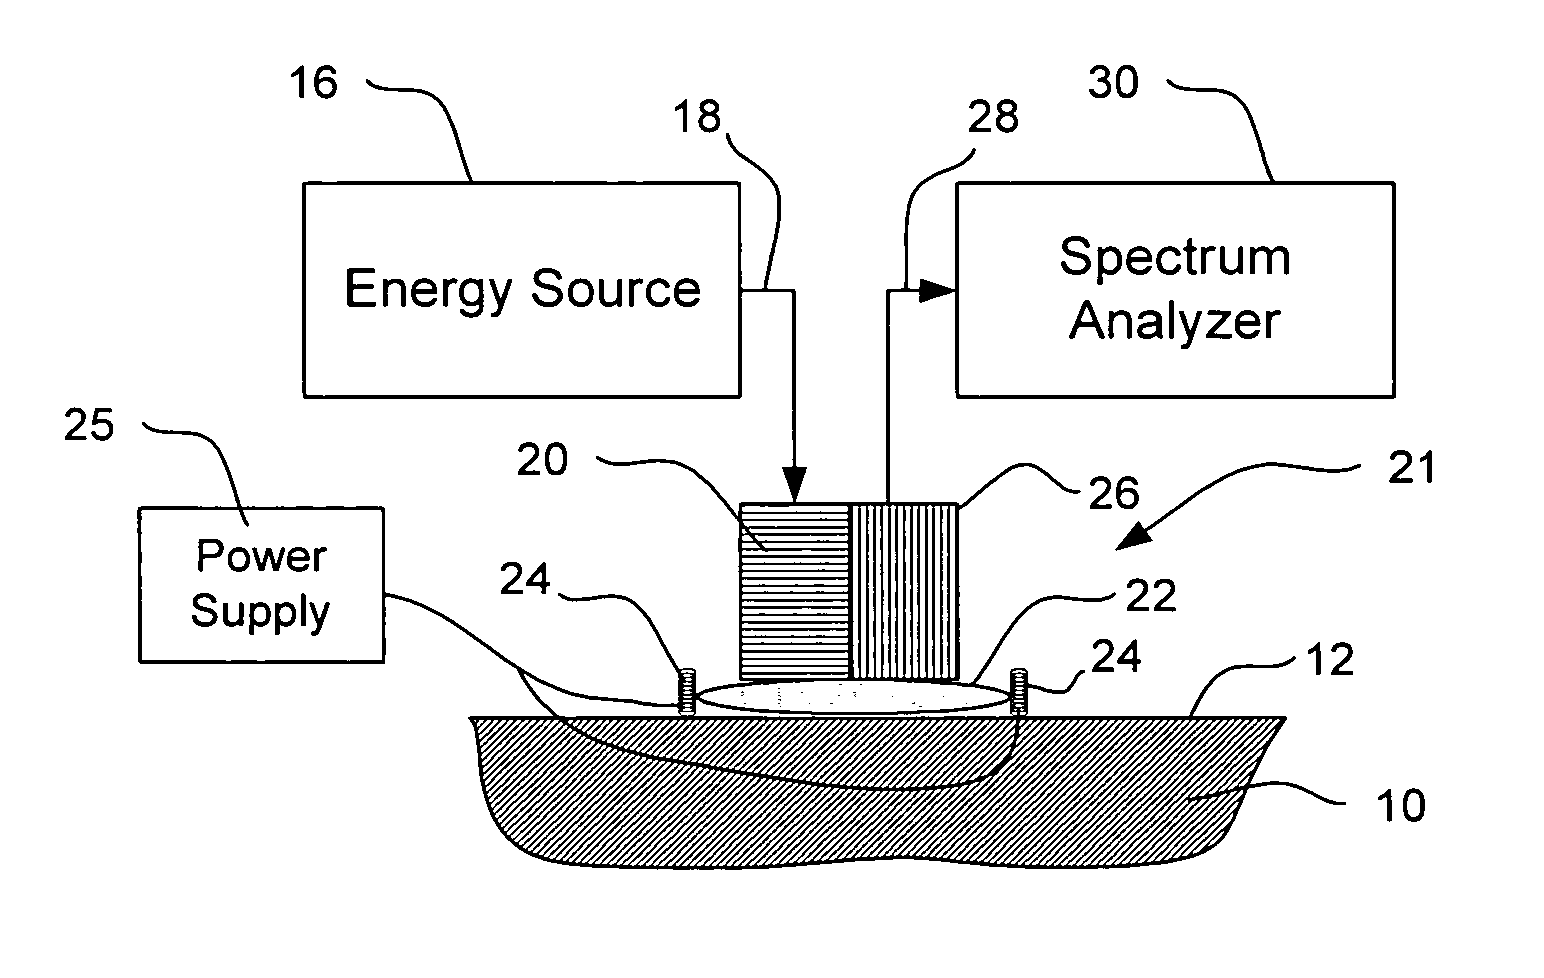 Apparatus for non-invasive determination of direction and rate of change of an analyte